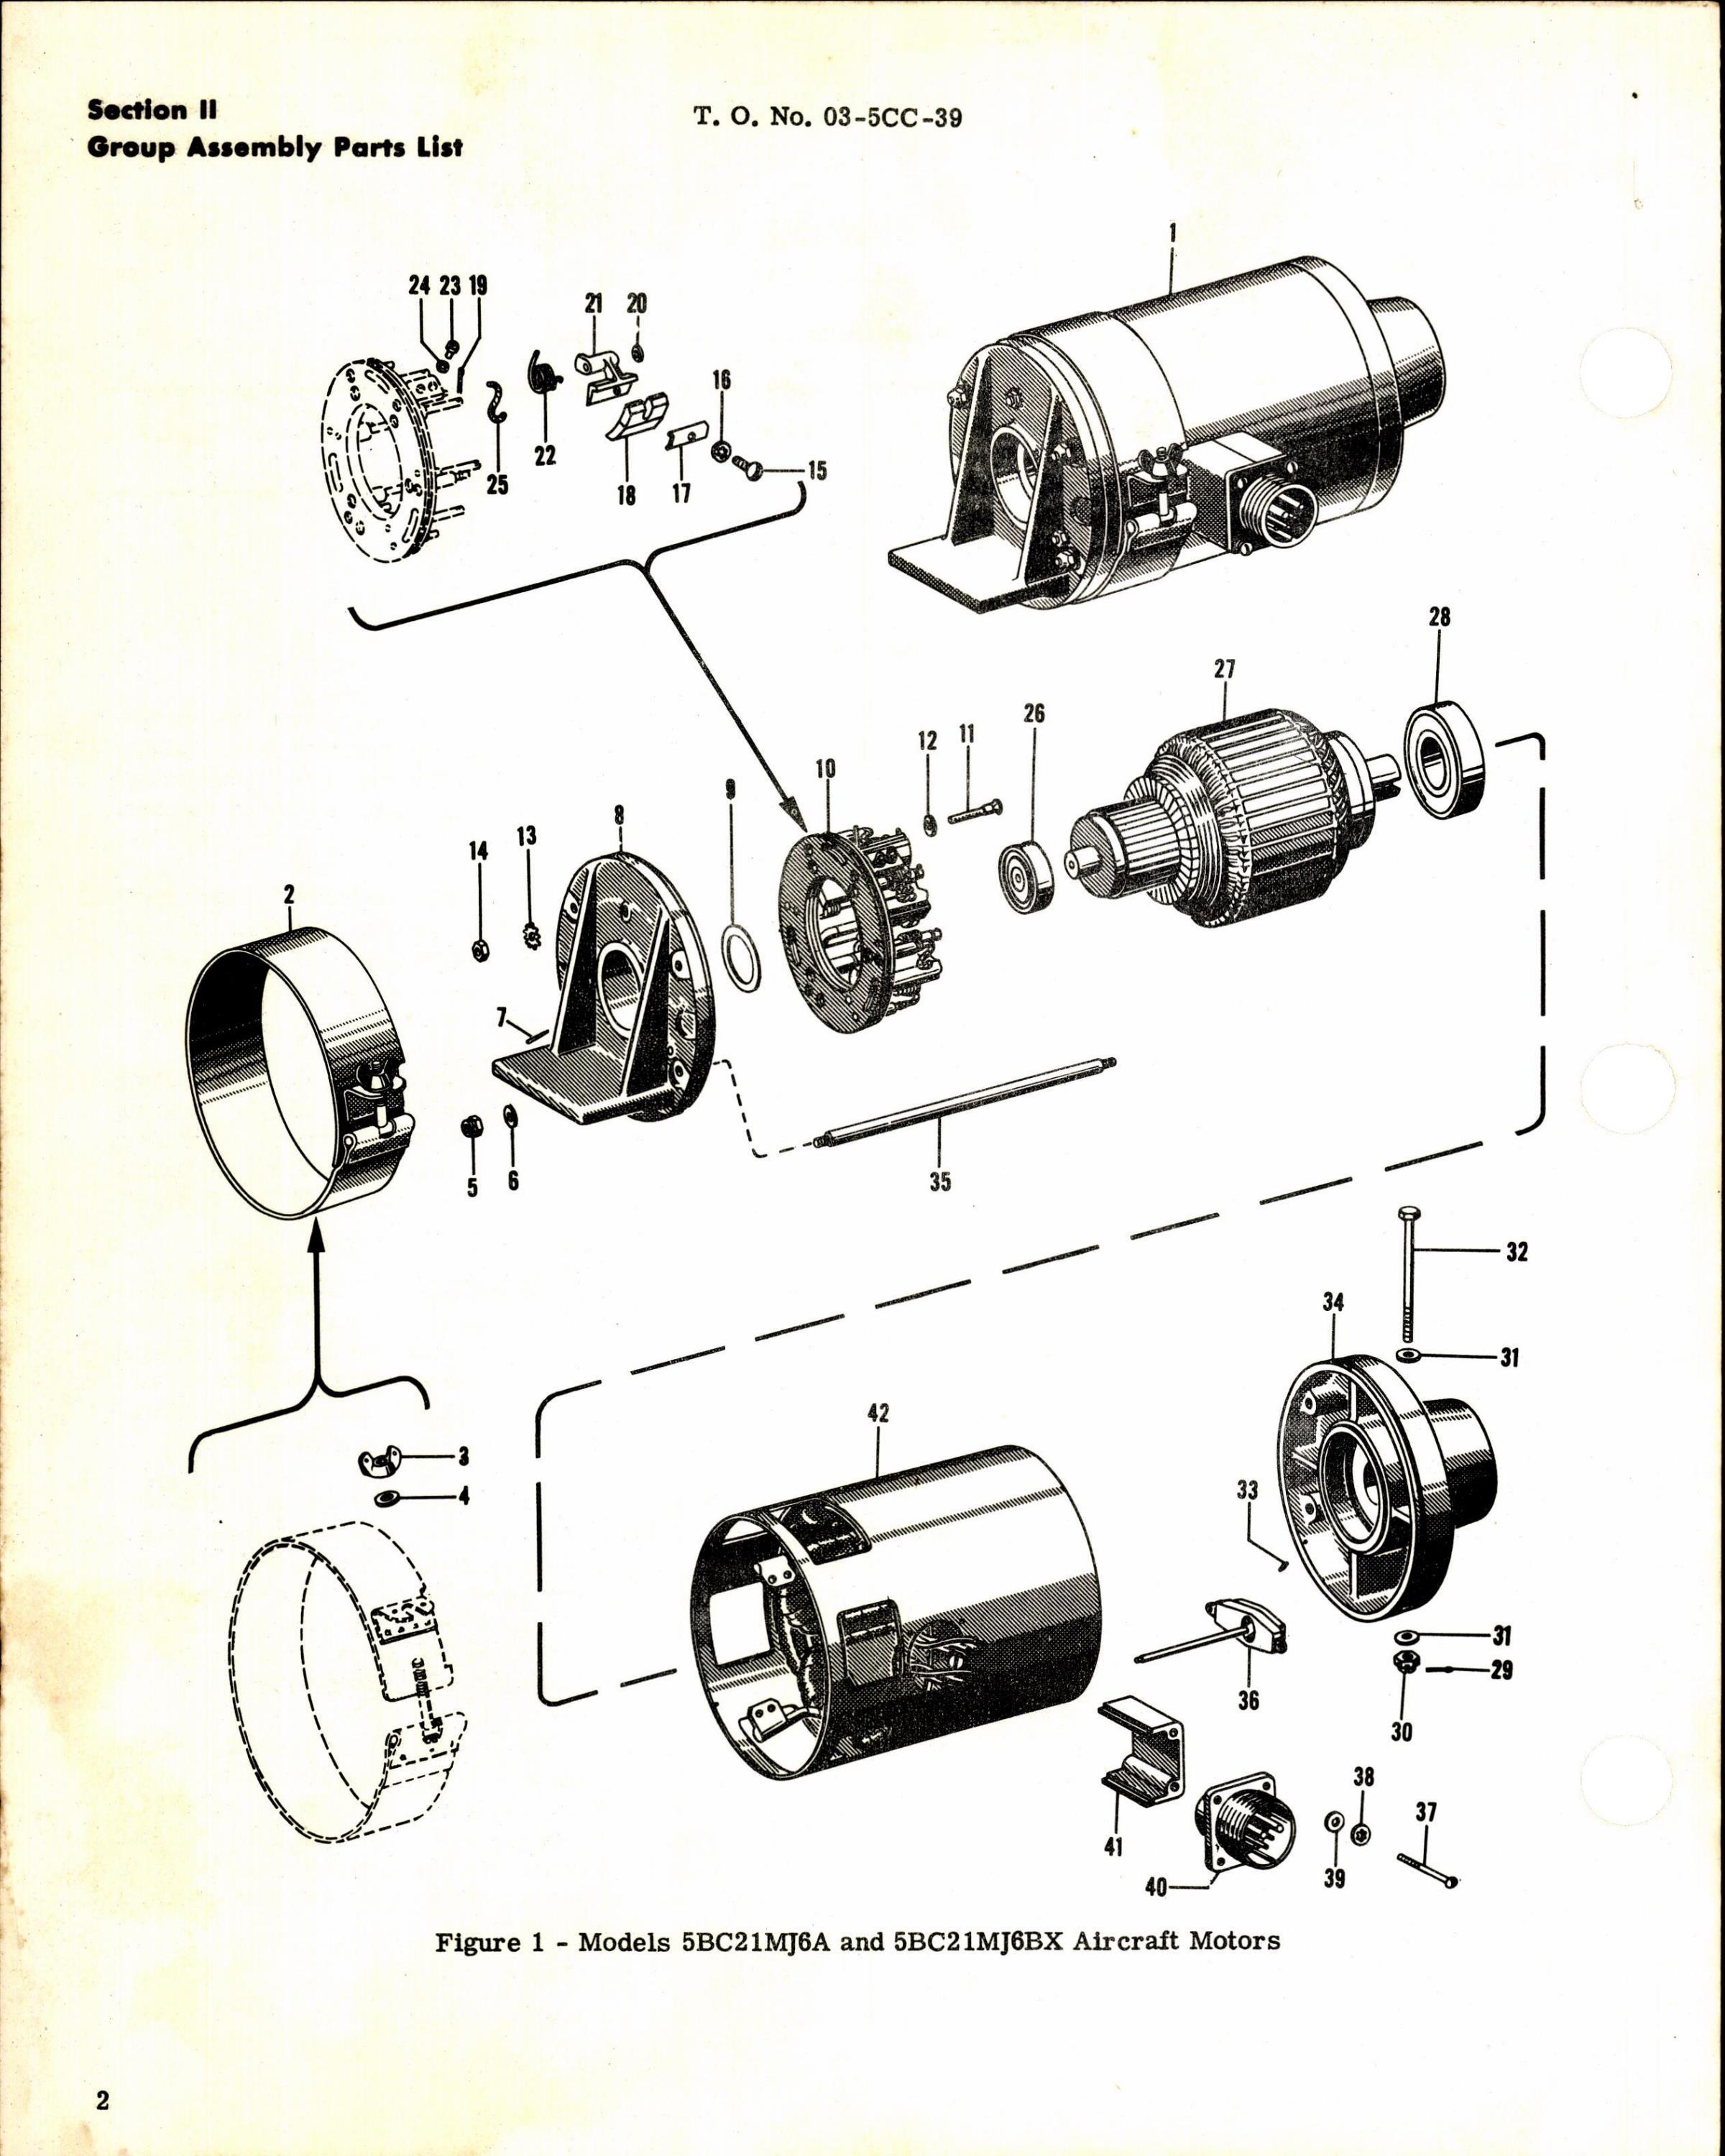 Sample page 4 from AirCorps Library document: Parts Catalog for General Electric Aircraft Motors, Series 5BC21